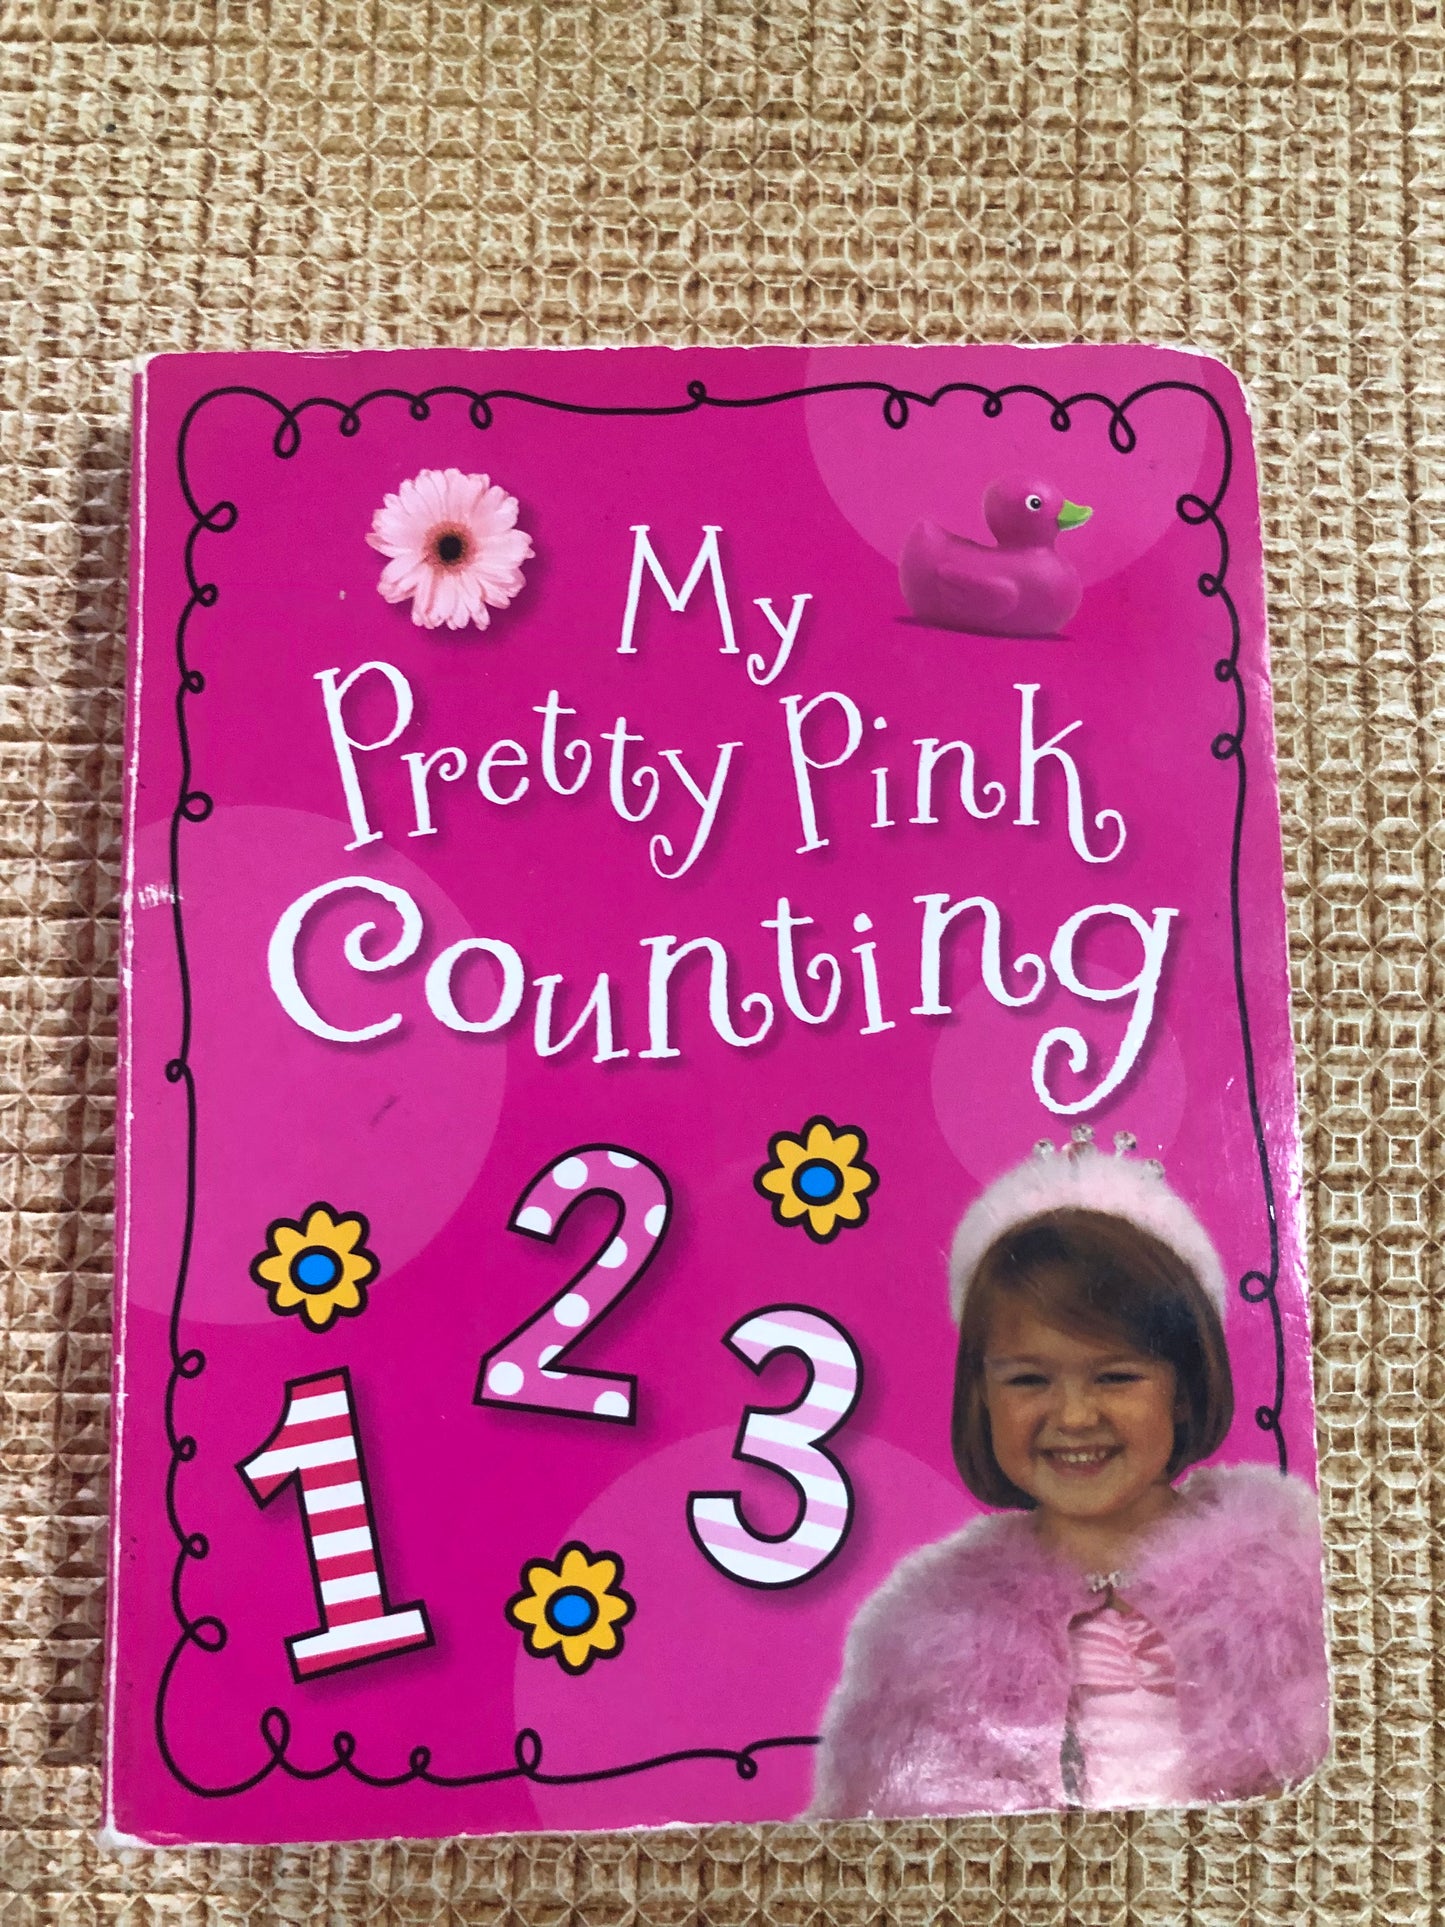 My Pretty pink Counting Book